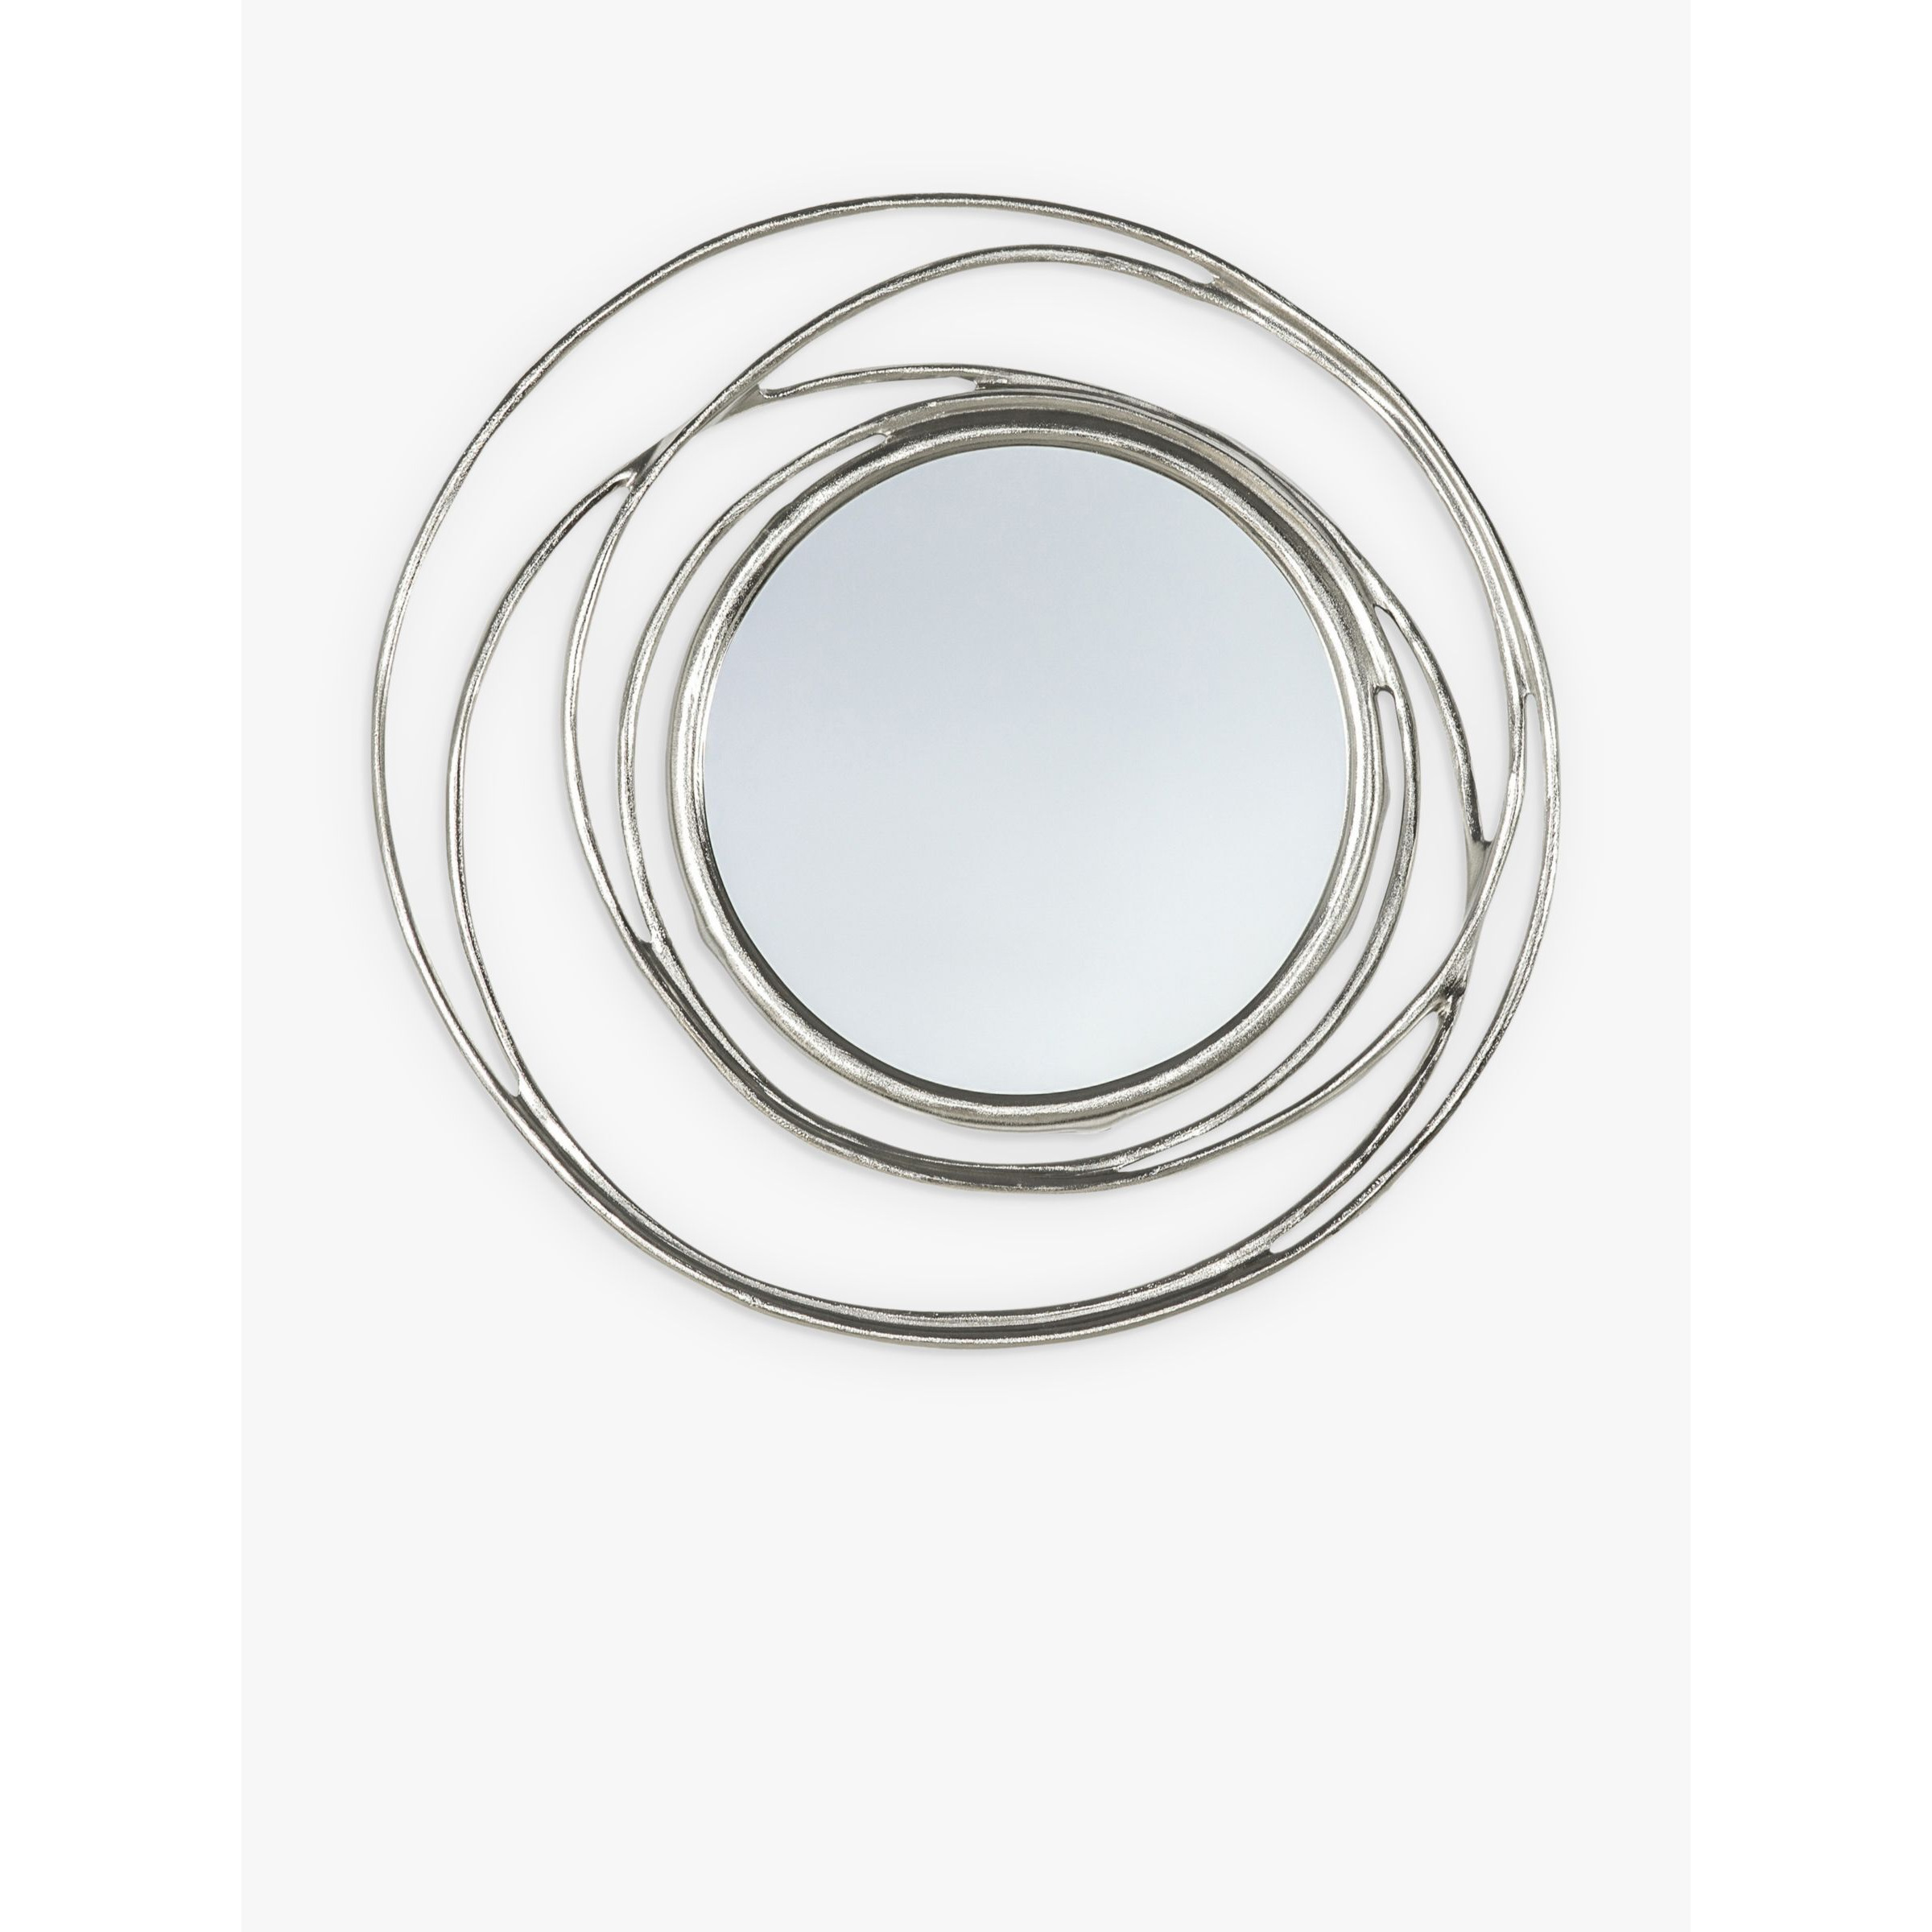 Gallery Direct Harrison Round Metal Frame Wall Mirror, 66cm - image 1